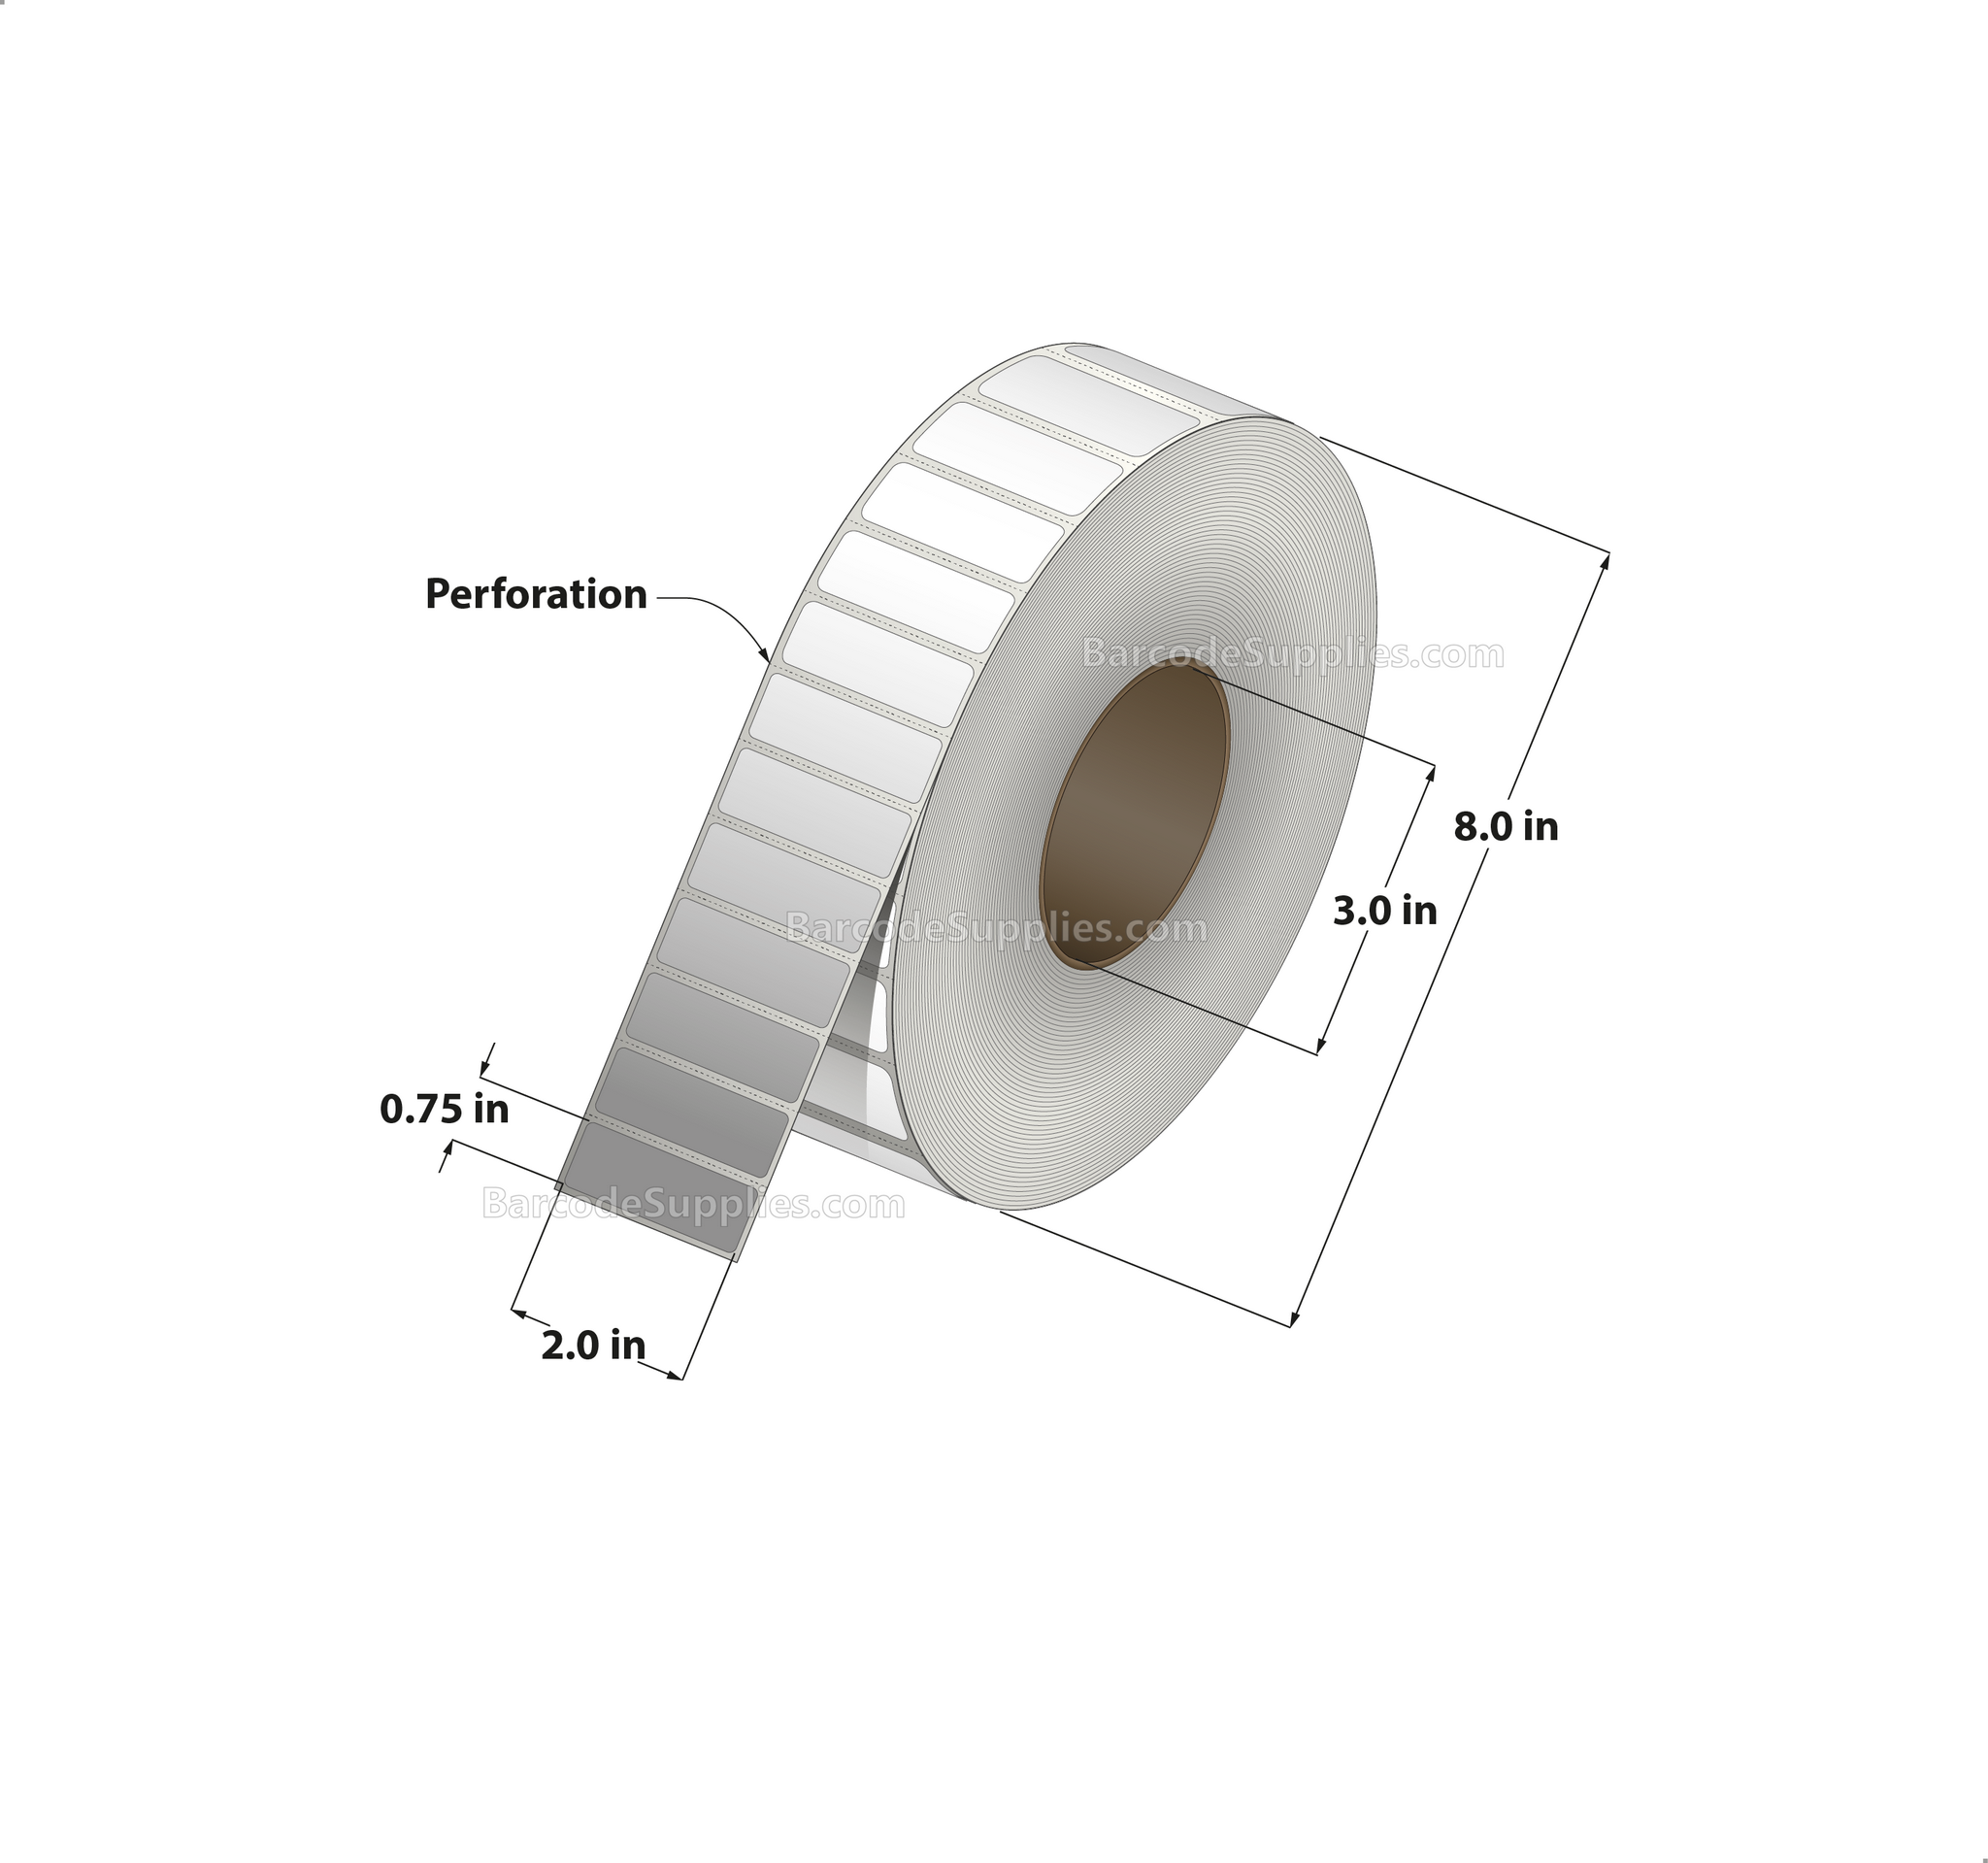 2 x 0.75 Thermal Transfer White Labels With Permanent Adhesive - Perforated - 7500 Labels Per Roll - Carton Of 8 Rolls - 60000 Labels Total - MPN: RT-2-075-7500-3